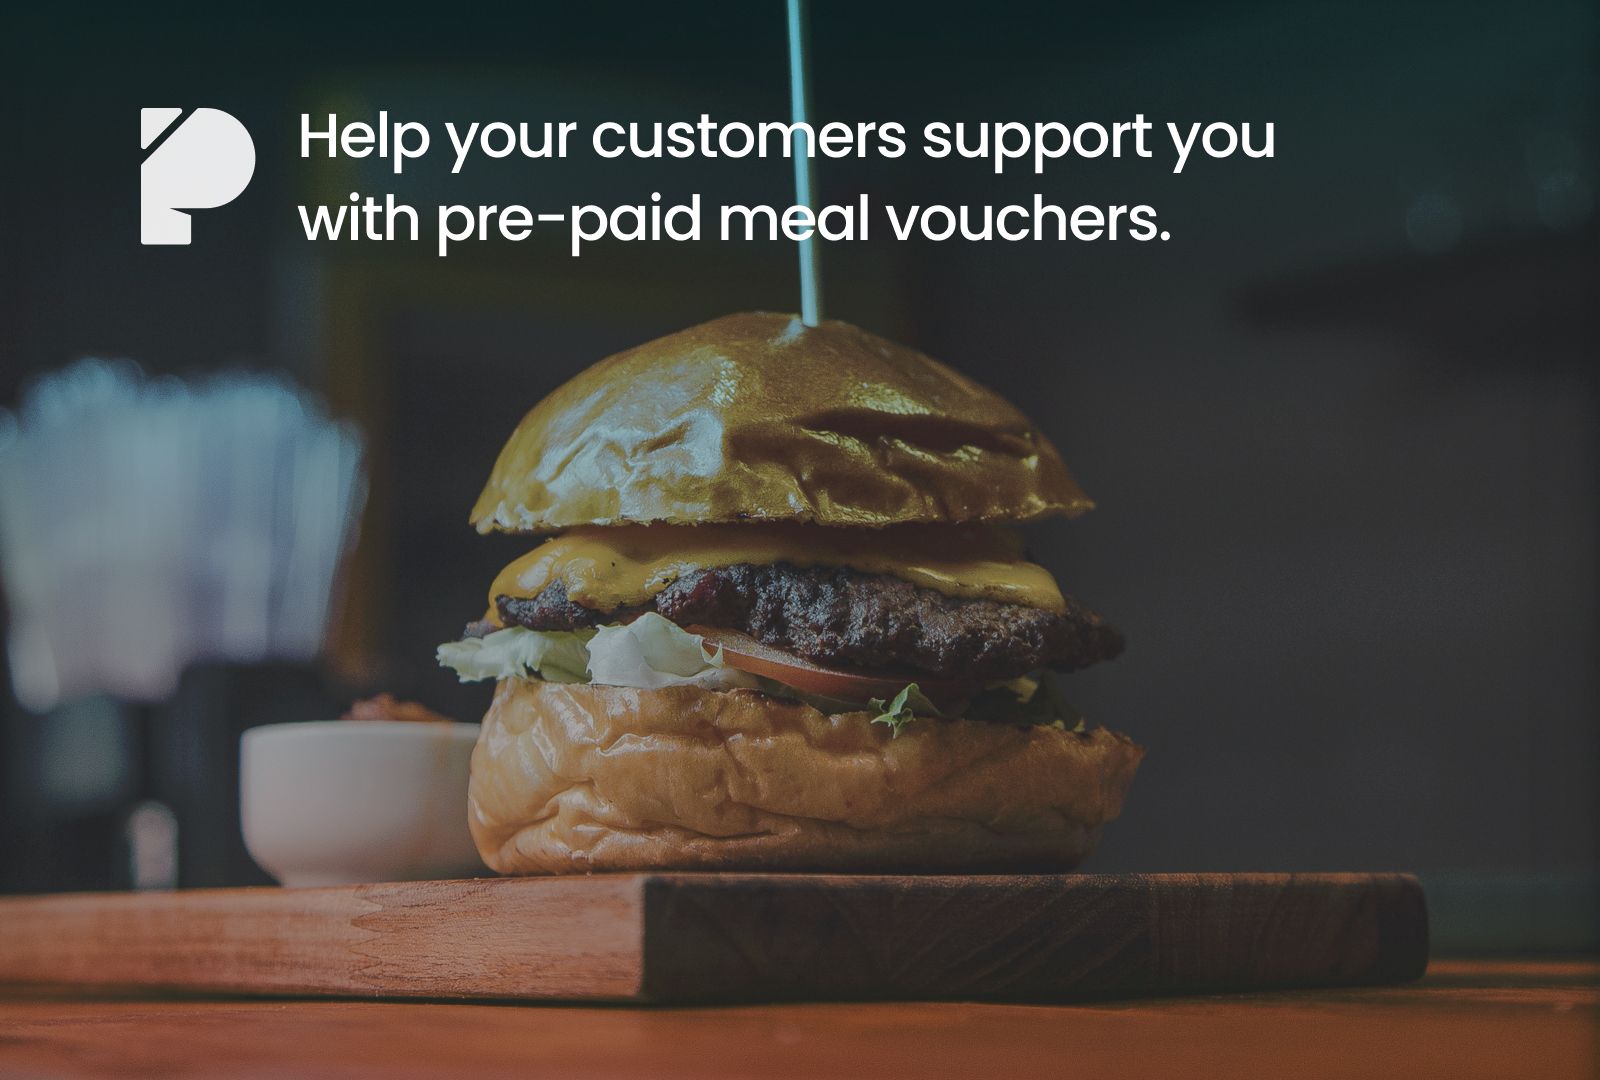 Easily sell pre-paid vouchers for your restaurant